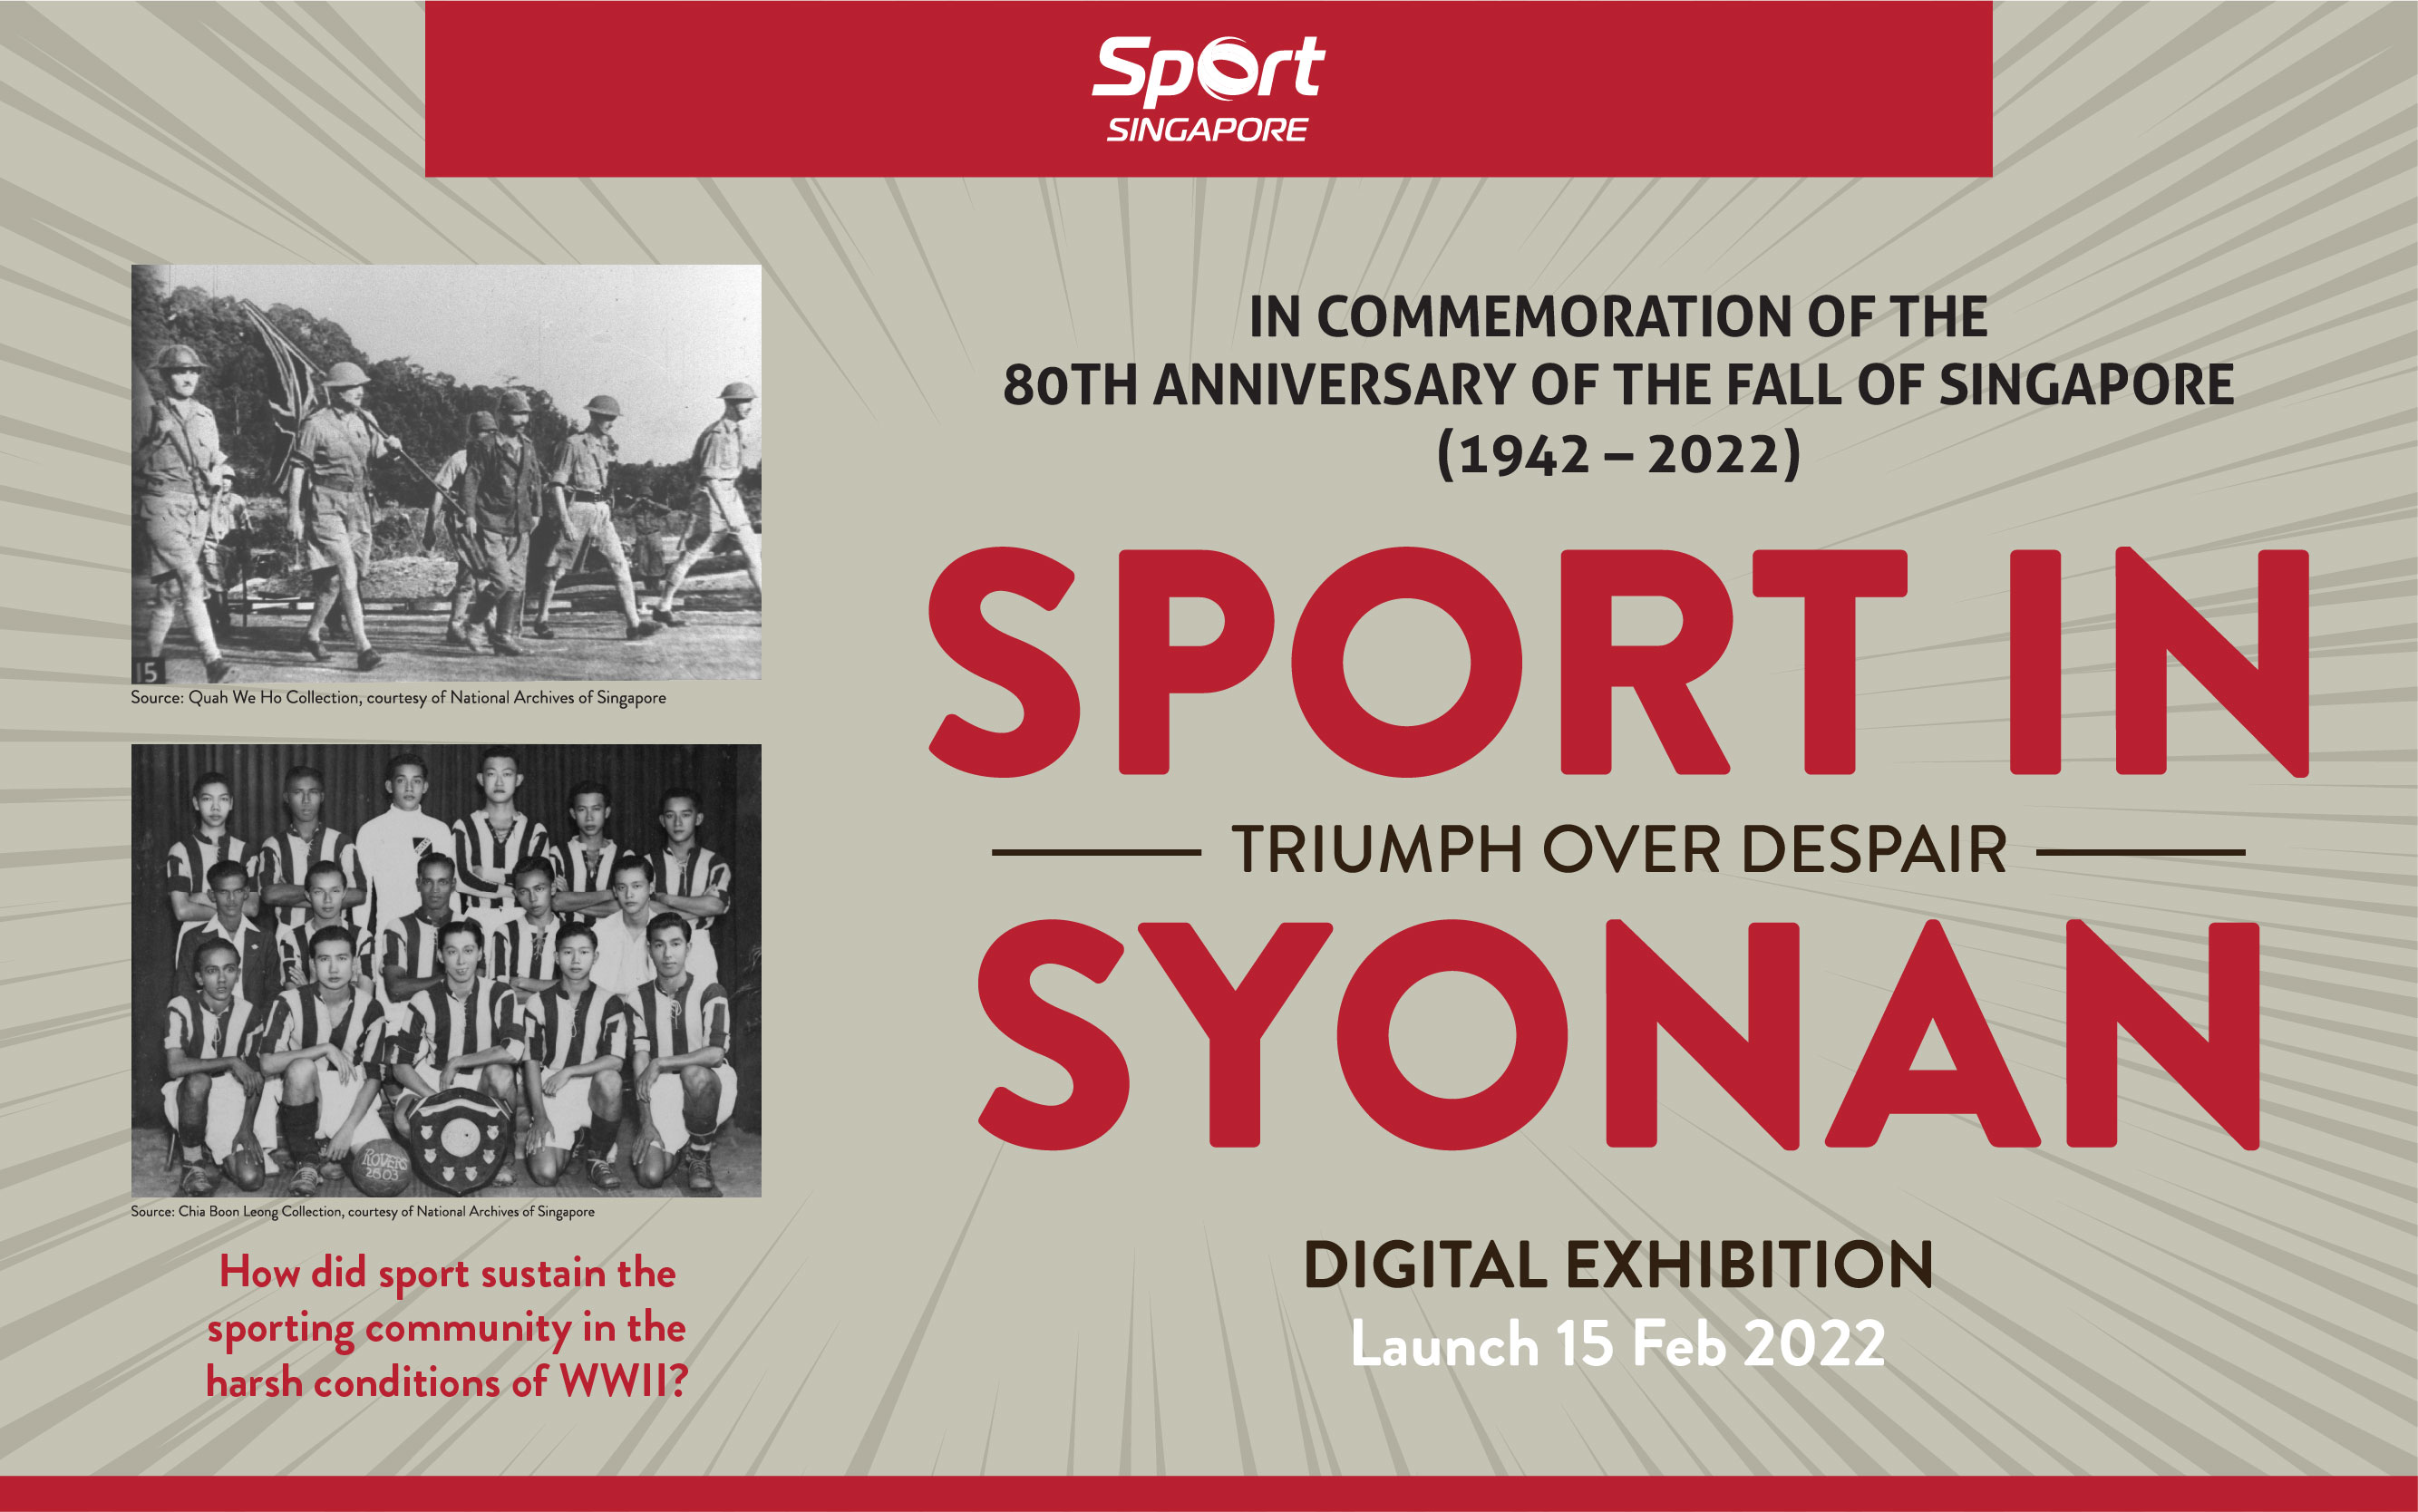 Sport in Syonan: Triumph over Despair - How did sport sustain the community during WWII?